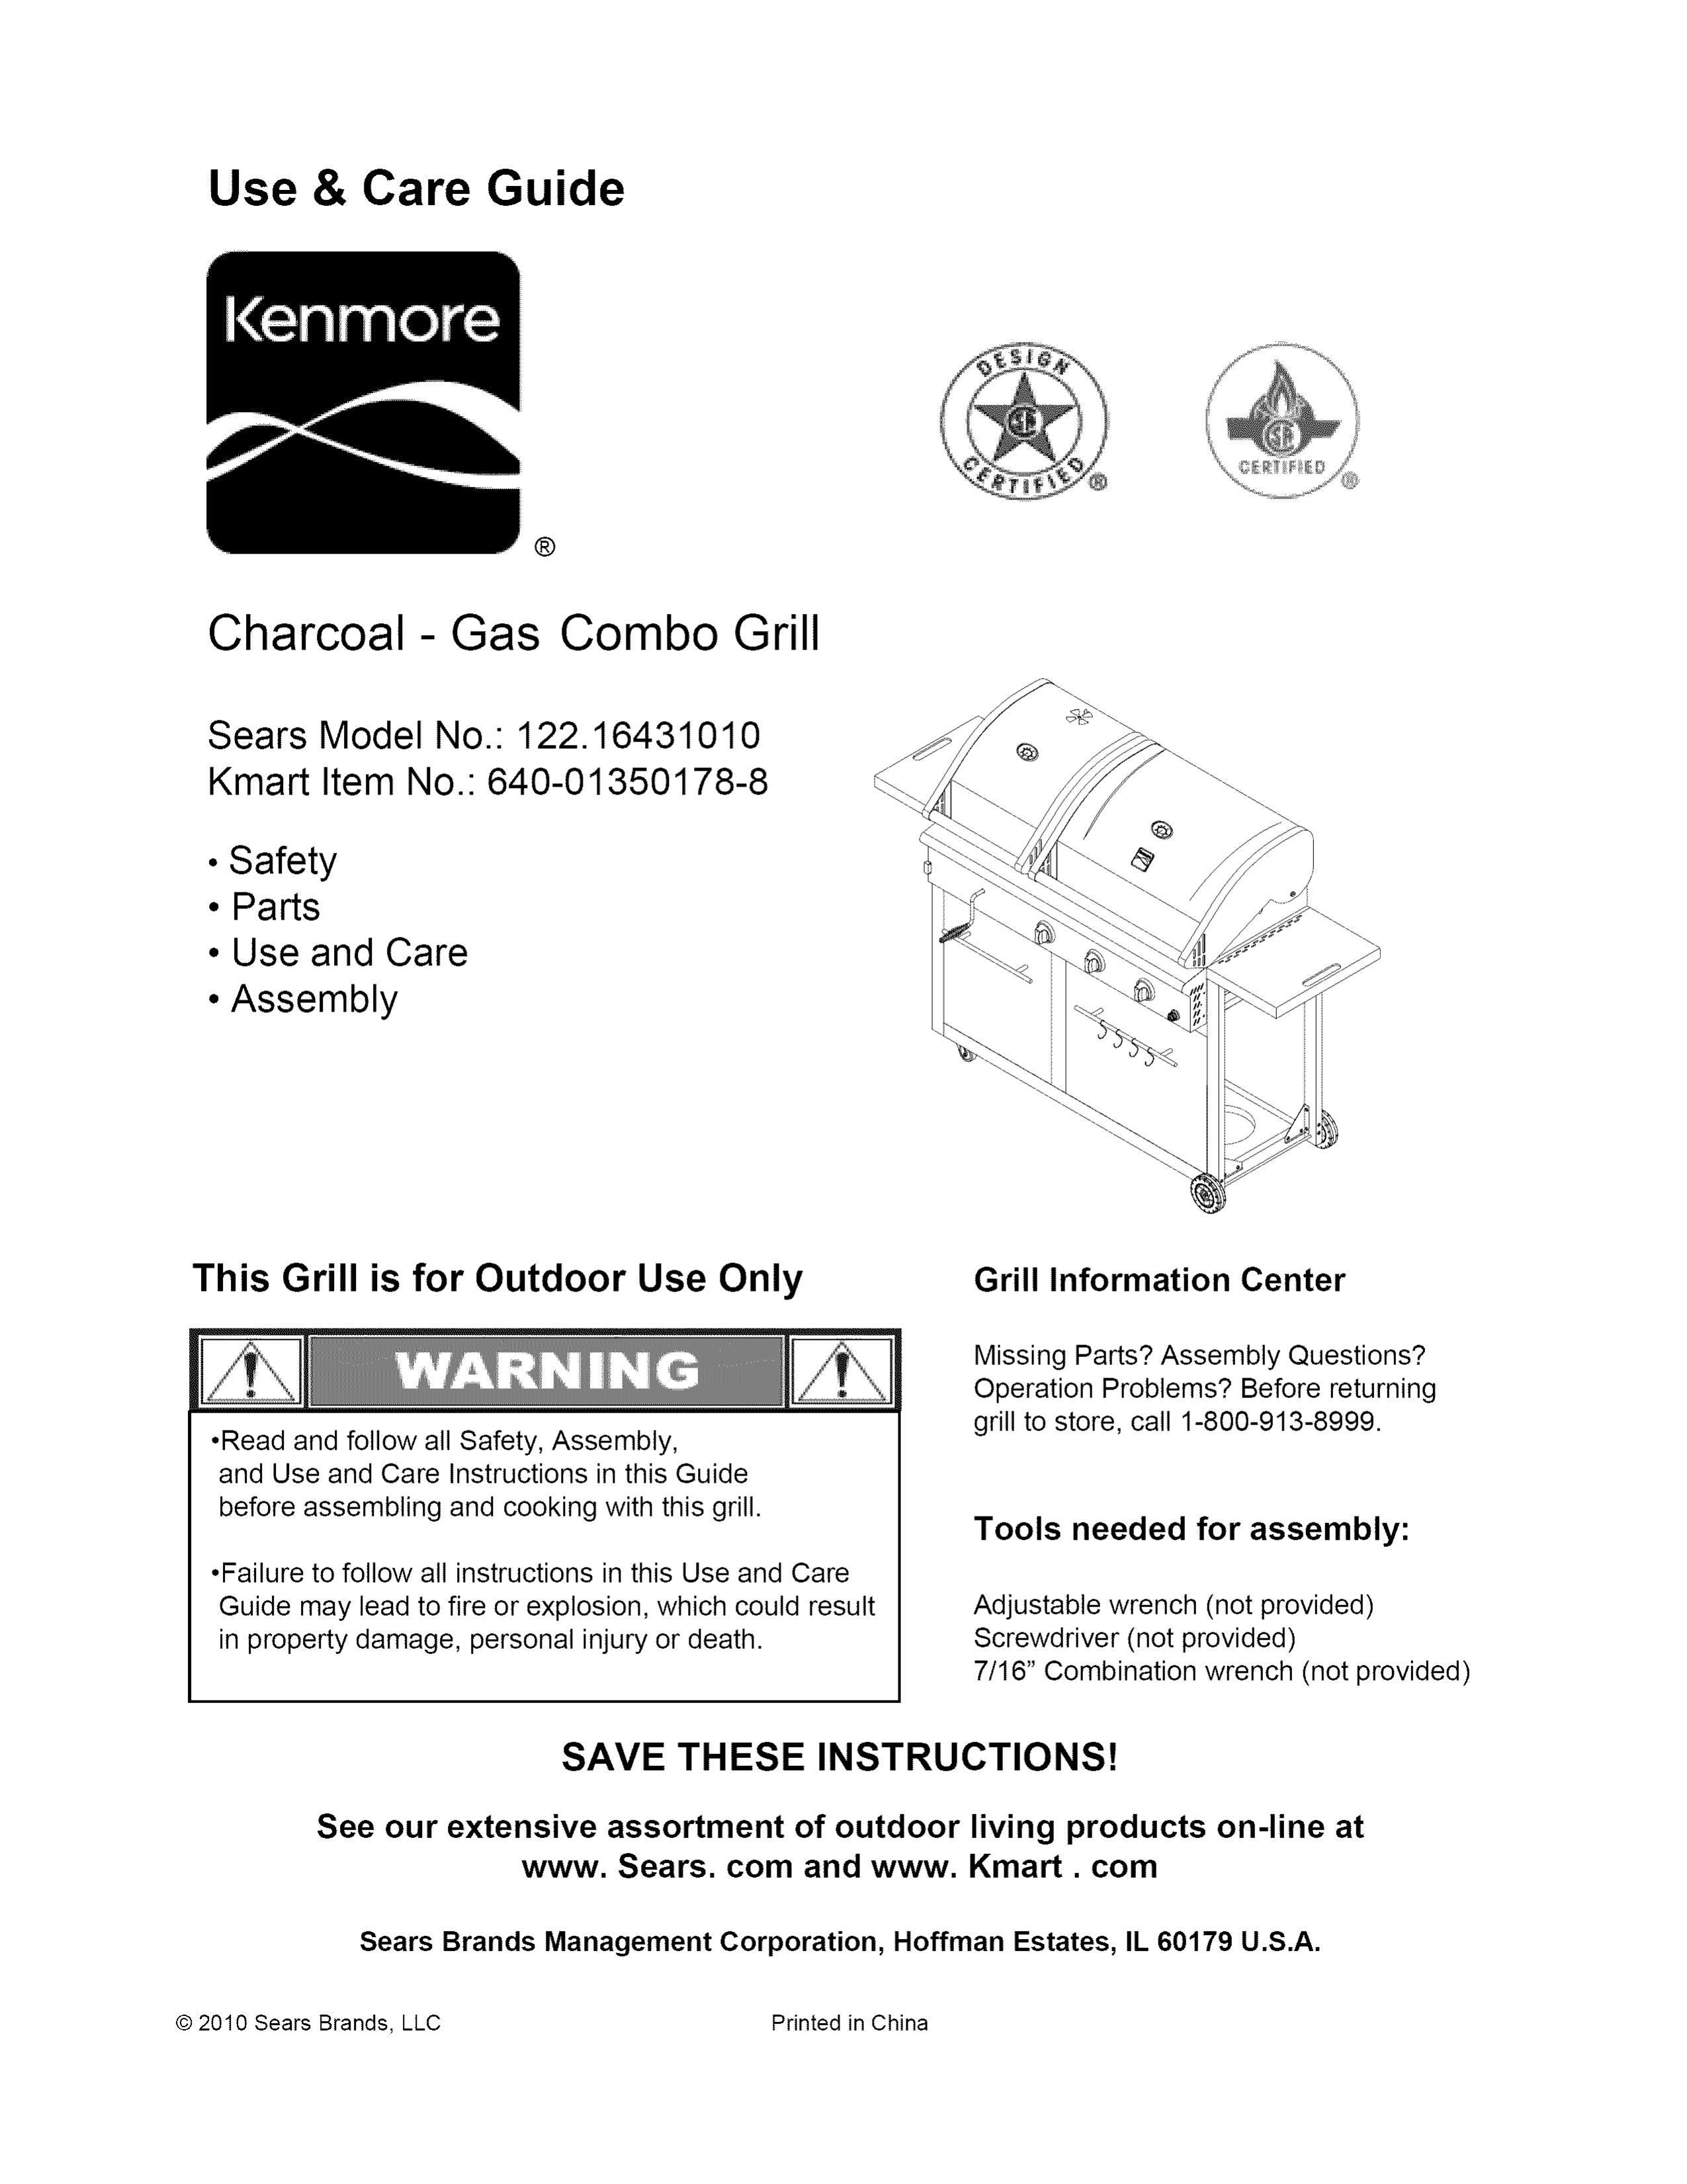 Kenmore 122.1643101 Gas Grill User Manual